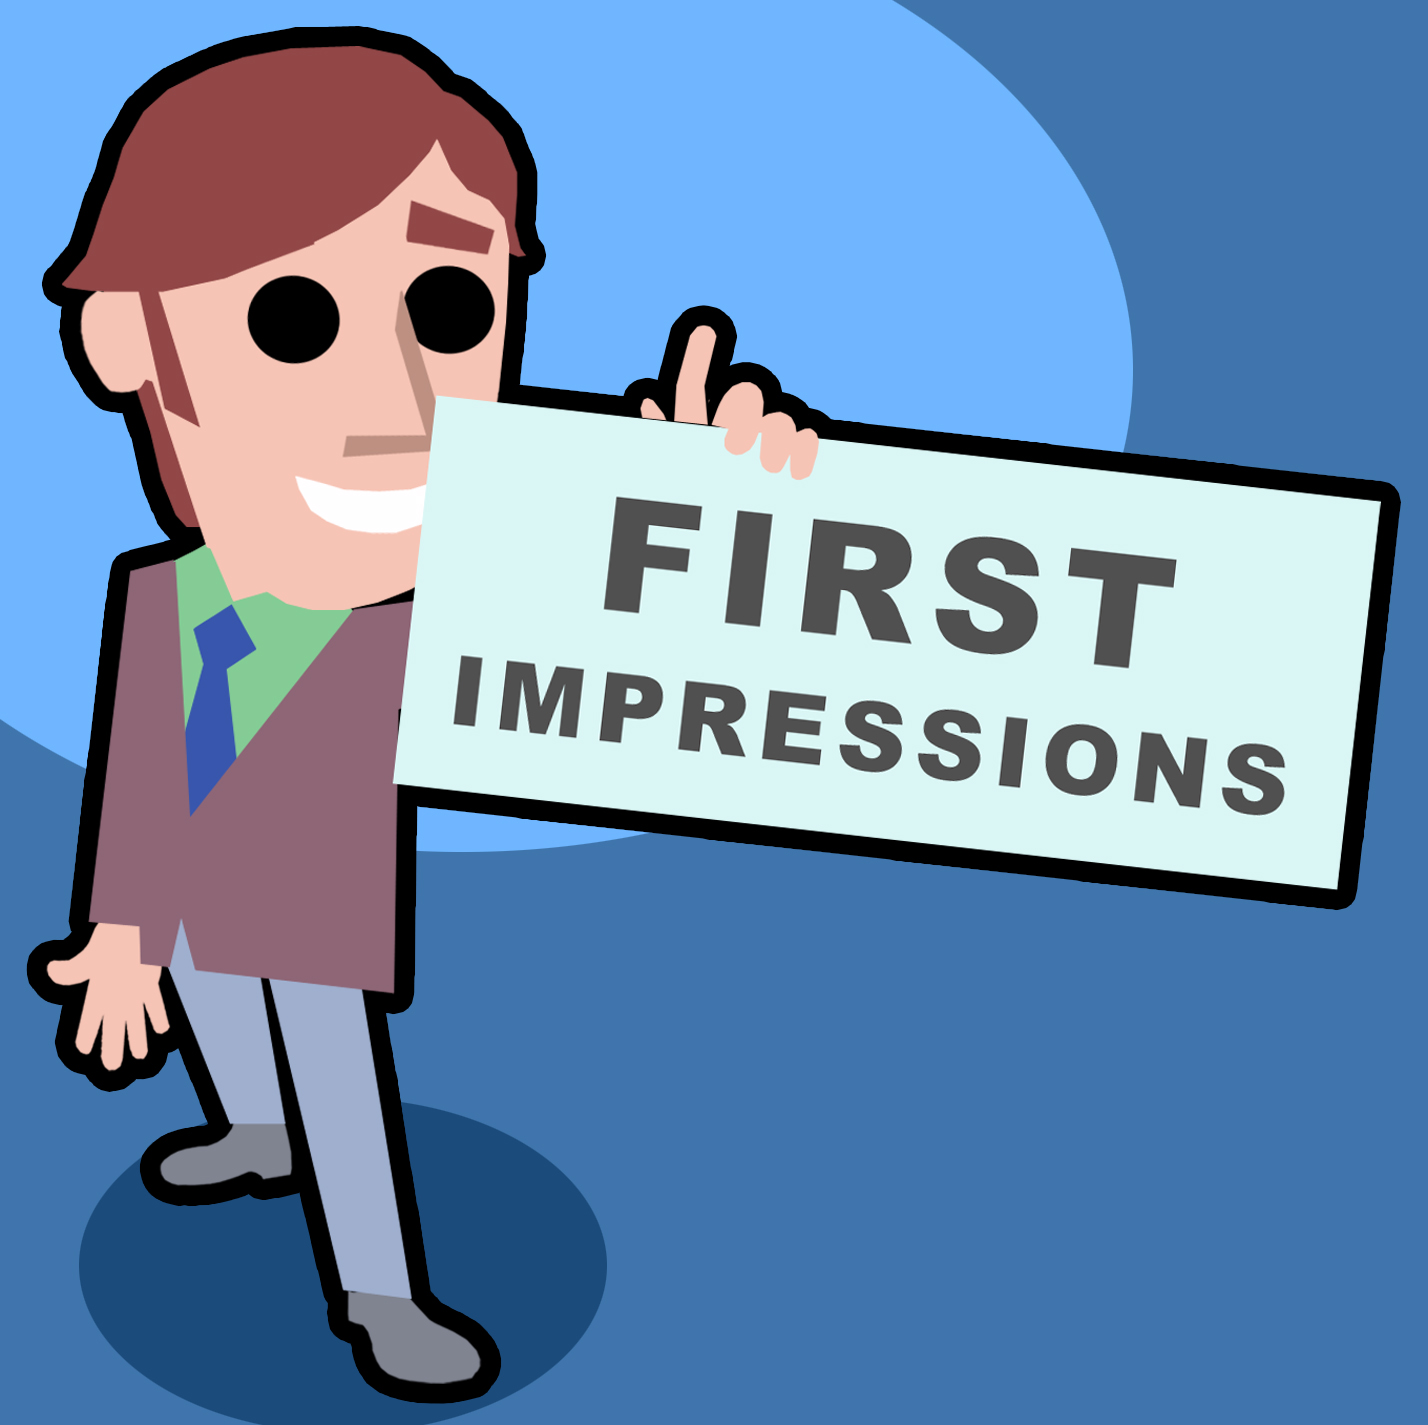 First impressions: make your first site visit stand out